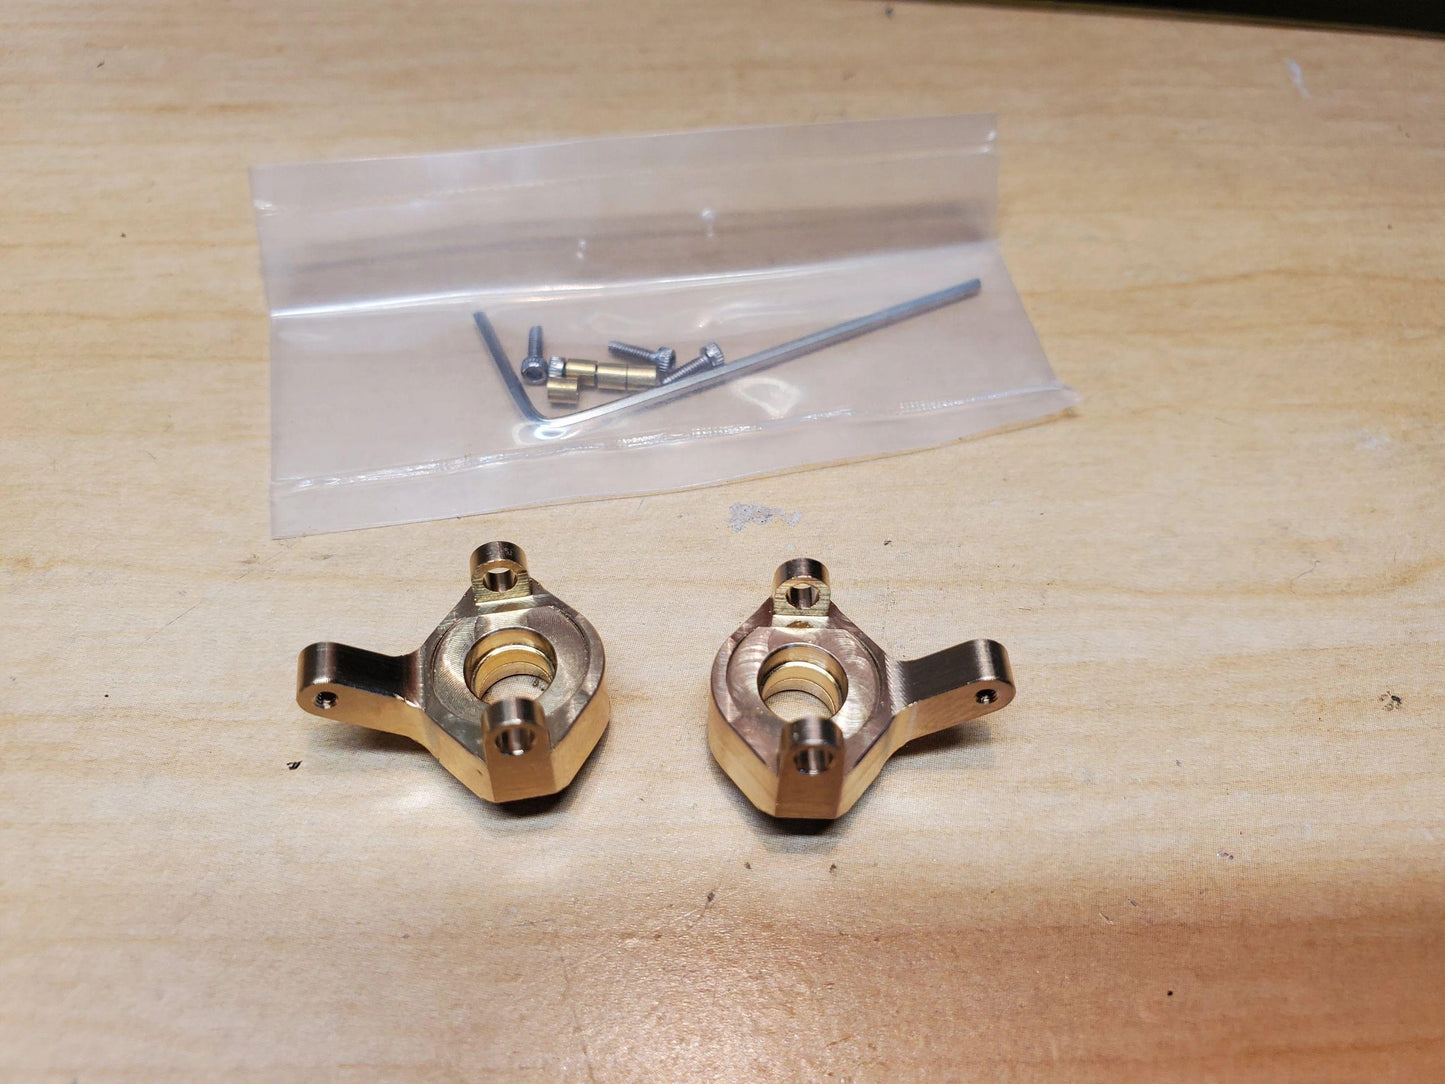 Brass Steering knuckles for the SCX24 / AX24